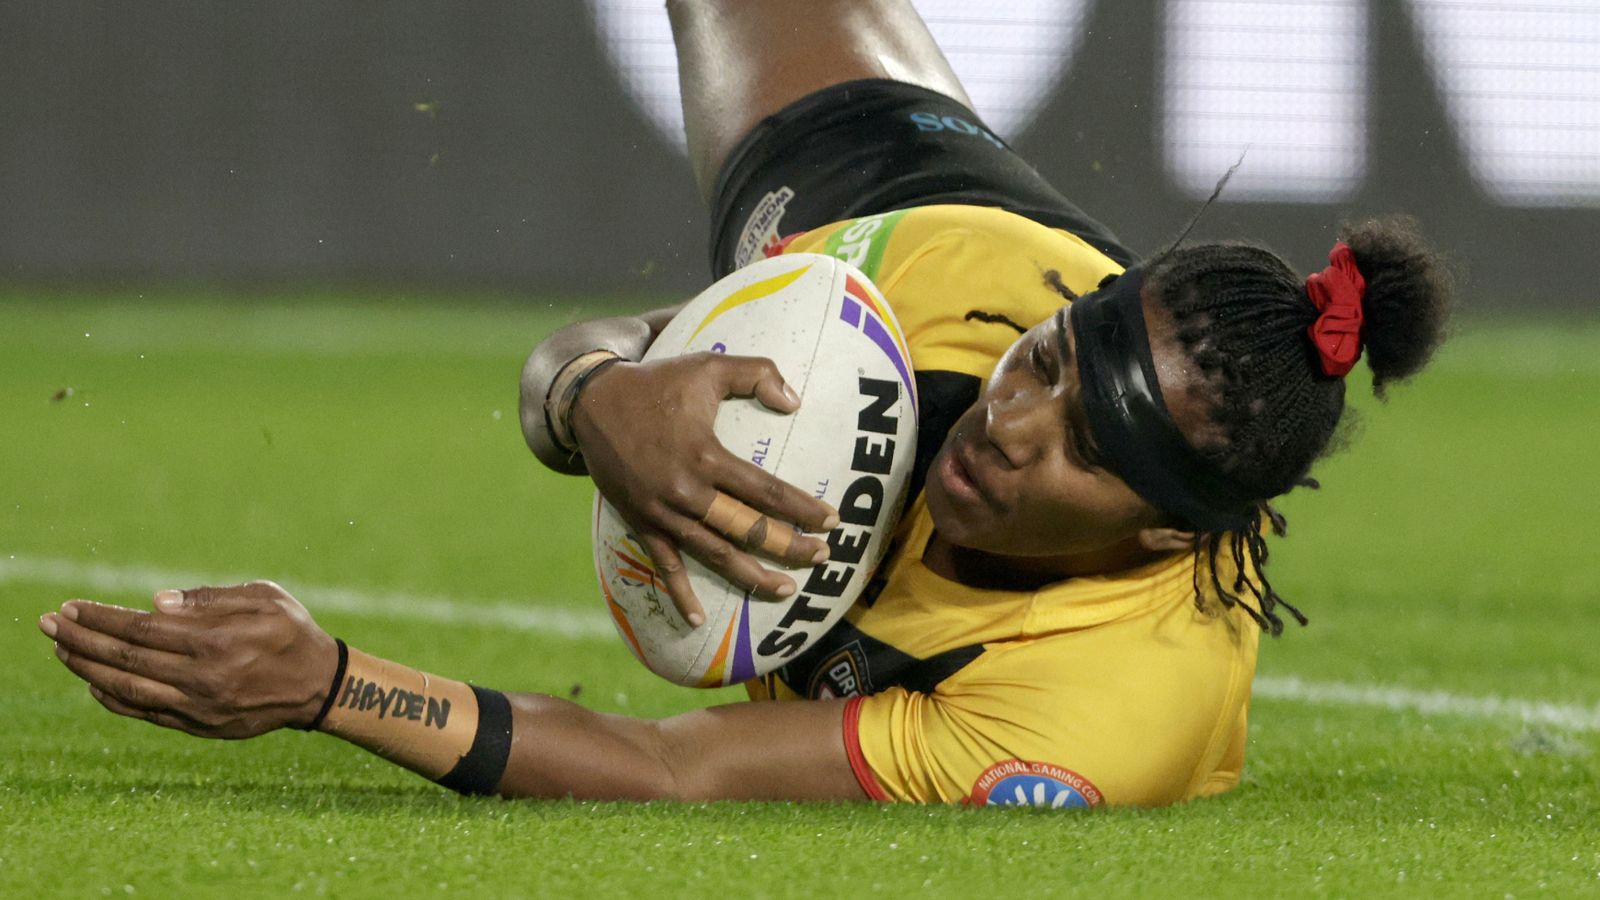 rugby-league-world-cup-news-papua-new-guinea-trounce-brazil-to-guarantee-semi-final-spot-or-play-england-next-to-decide-the-top-of-group-a